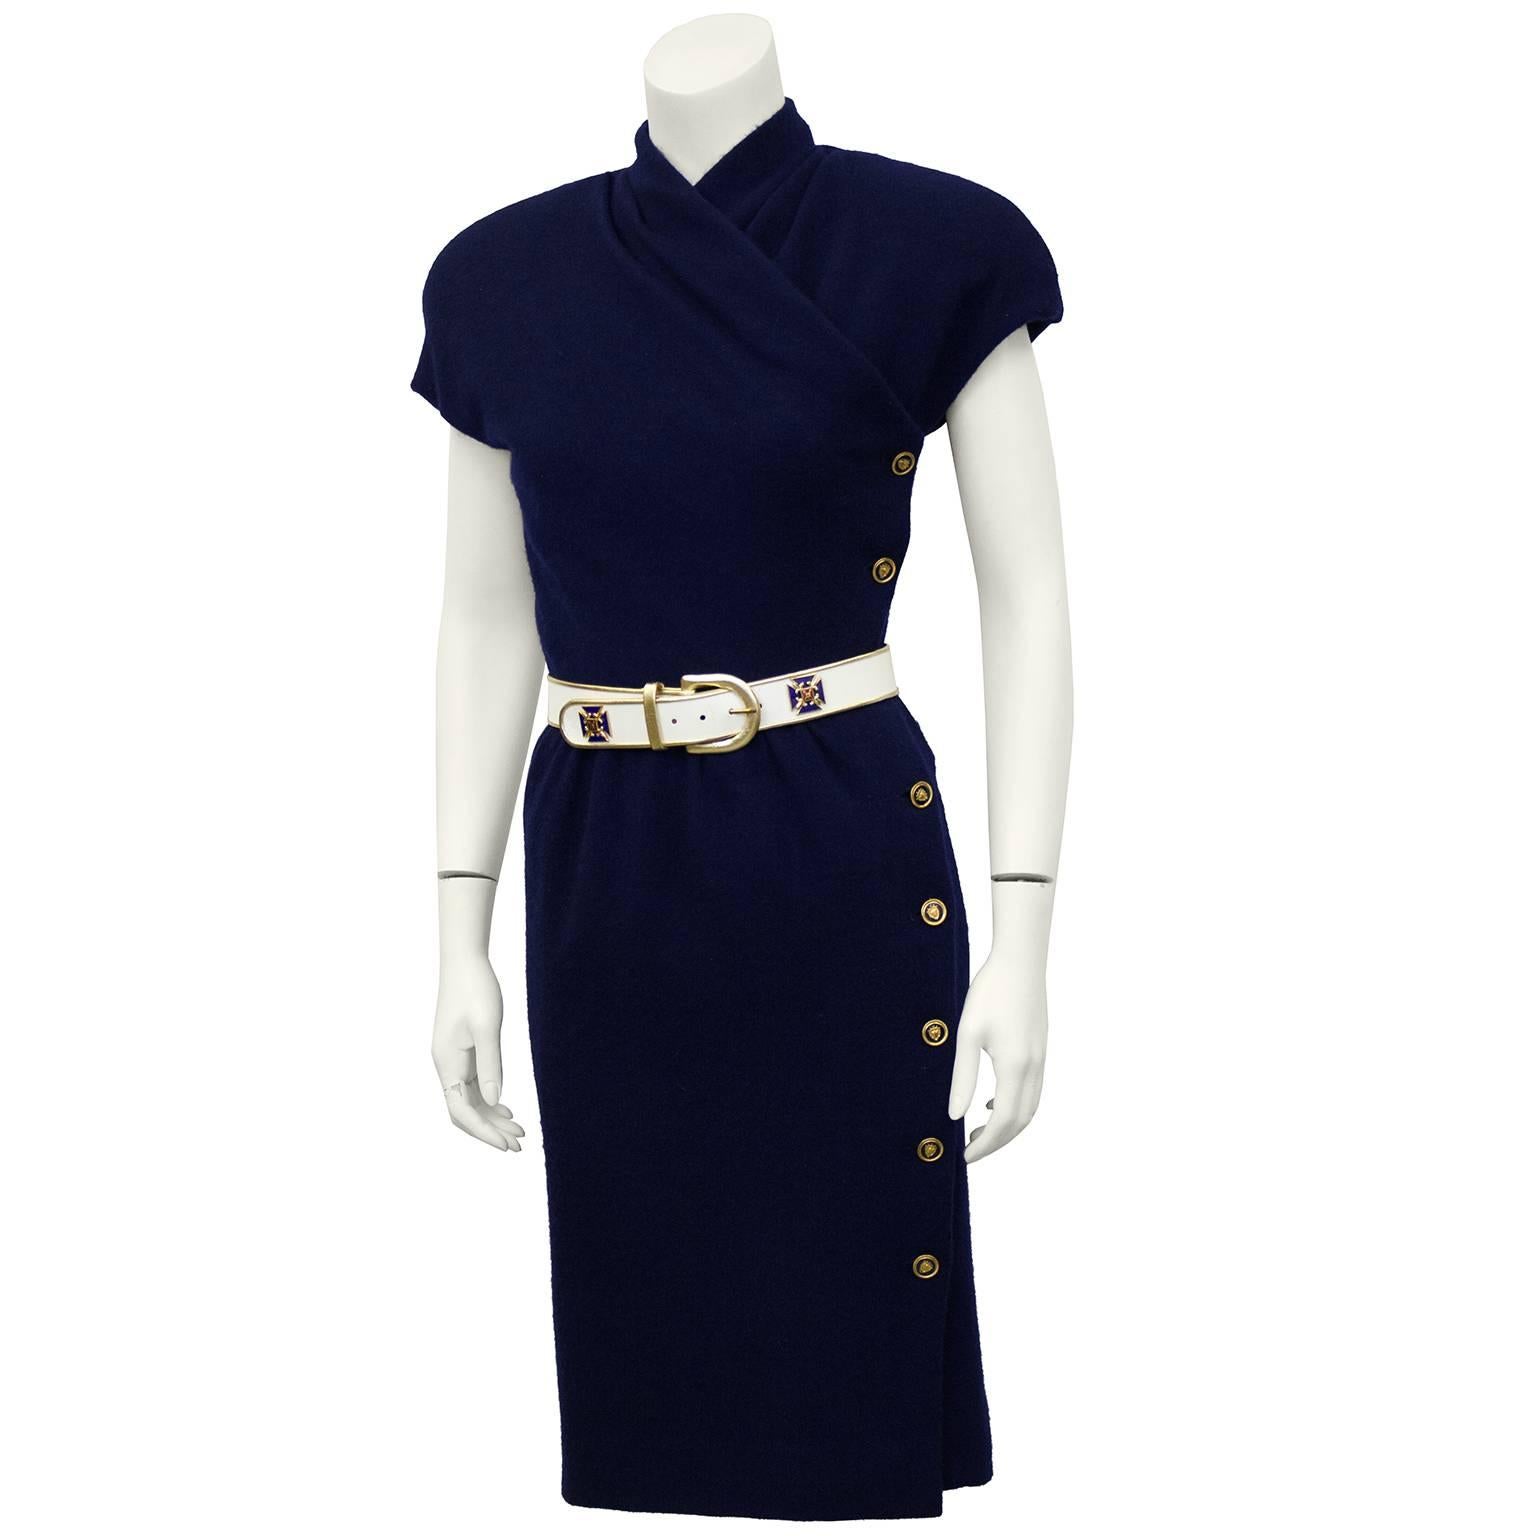 1980's Carolyne Roehm navy blue wool short sleeve faux wrap style dress. Gold and blue crest buttons down left side of body. Matching white leather and gold belt with same crest as buttons. Shoulder pads can be removed. Excellent vintage condition.